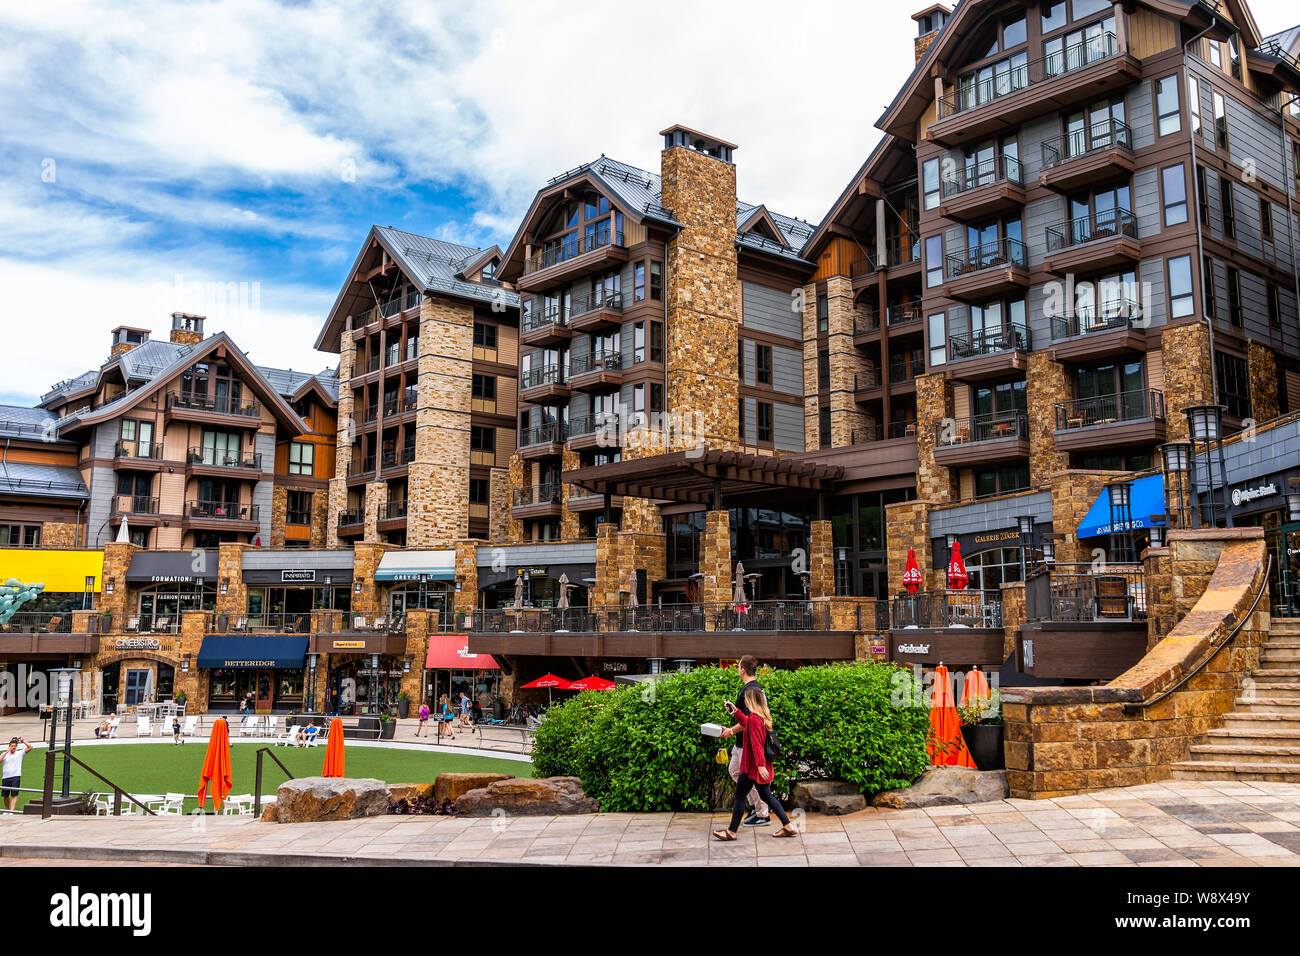 Vail, USA - June 29, 2019: European Swiss style resort town in Colorado with people walking by shops and Solaris hotel building Stock Photo